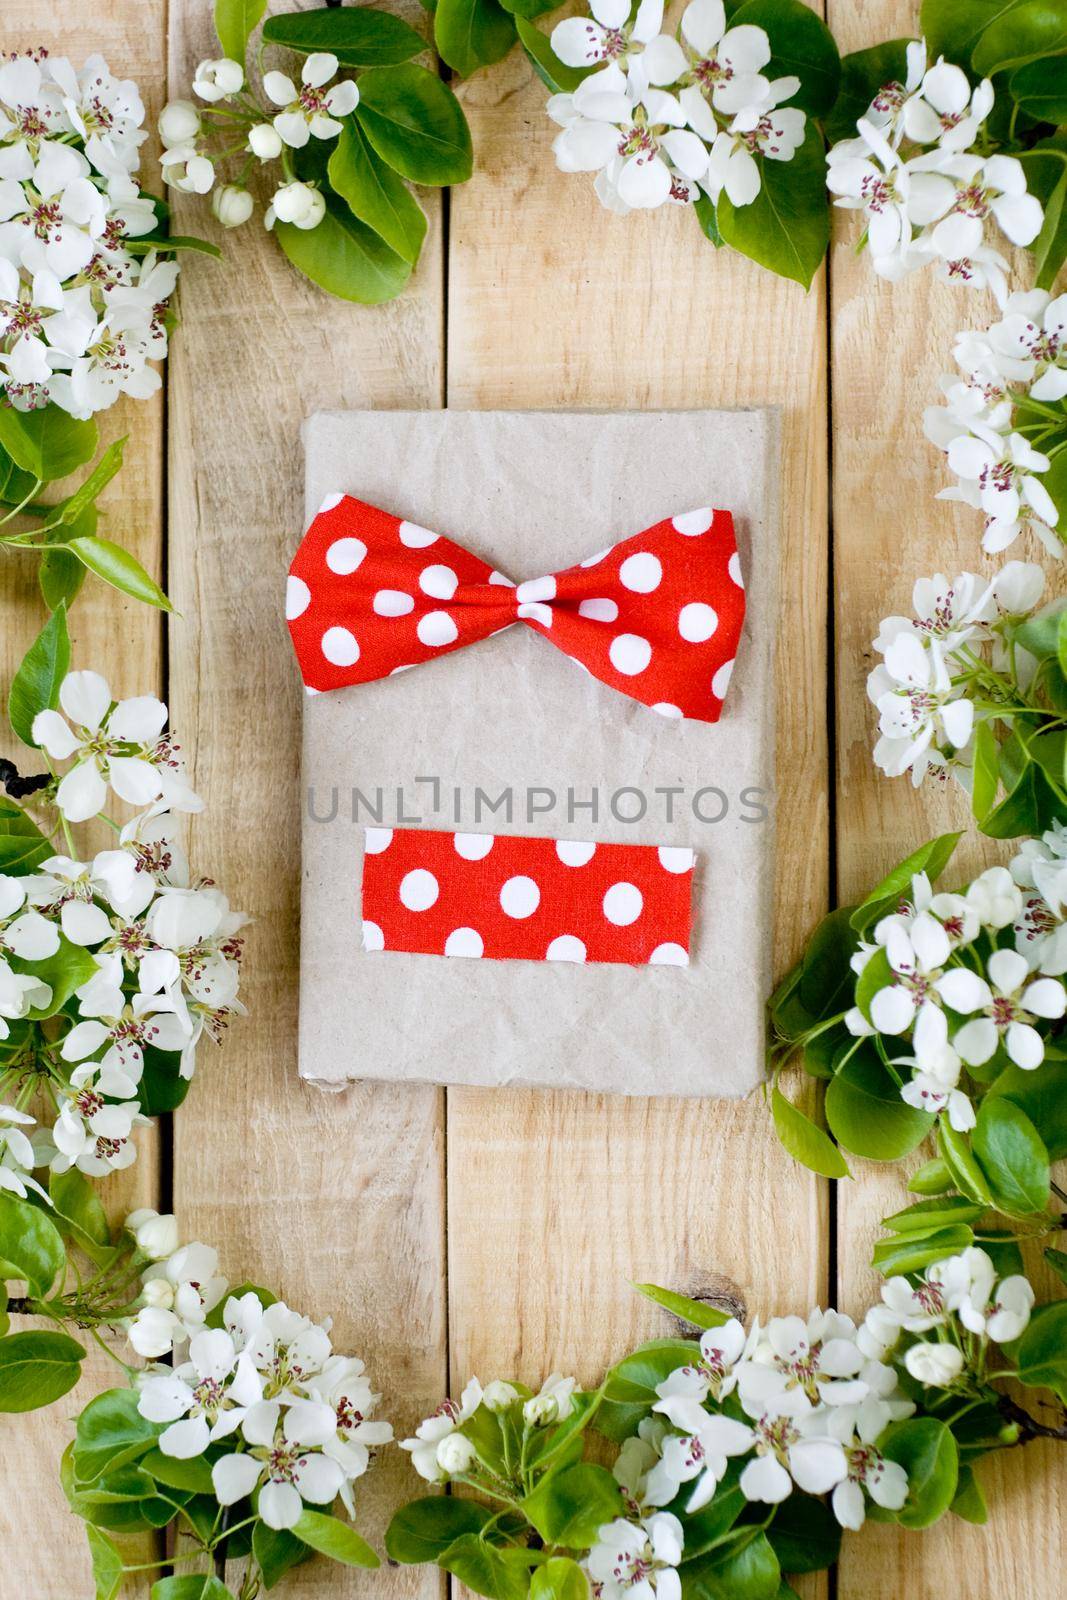 Natural wooden background with white flowers fruit tree. In the middle is a vintage notebook with bow tie